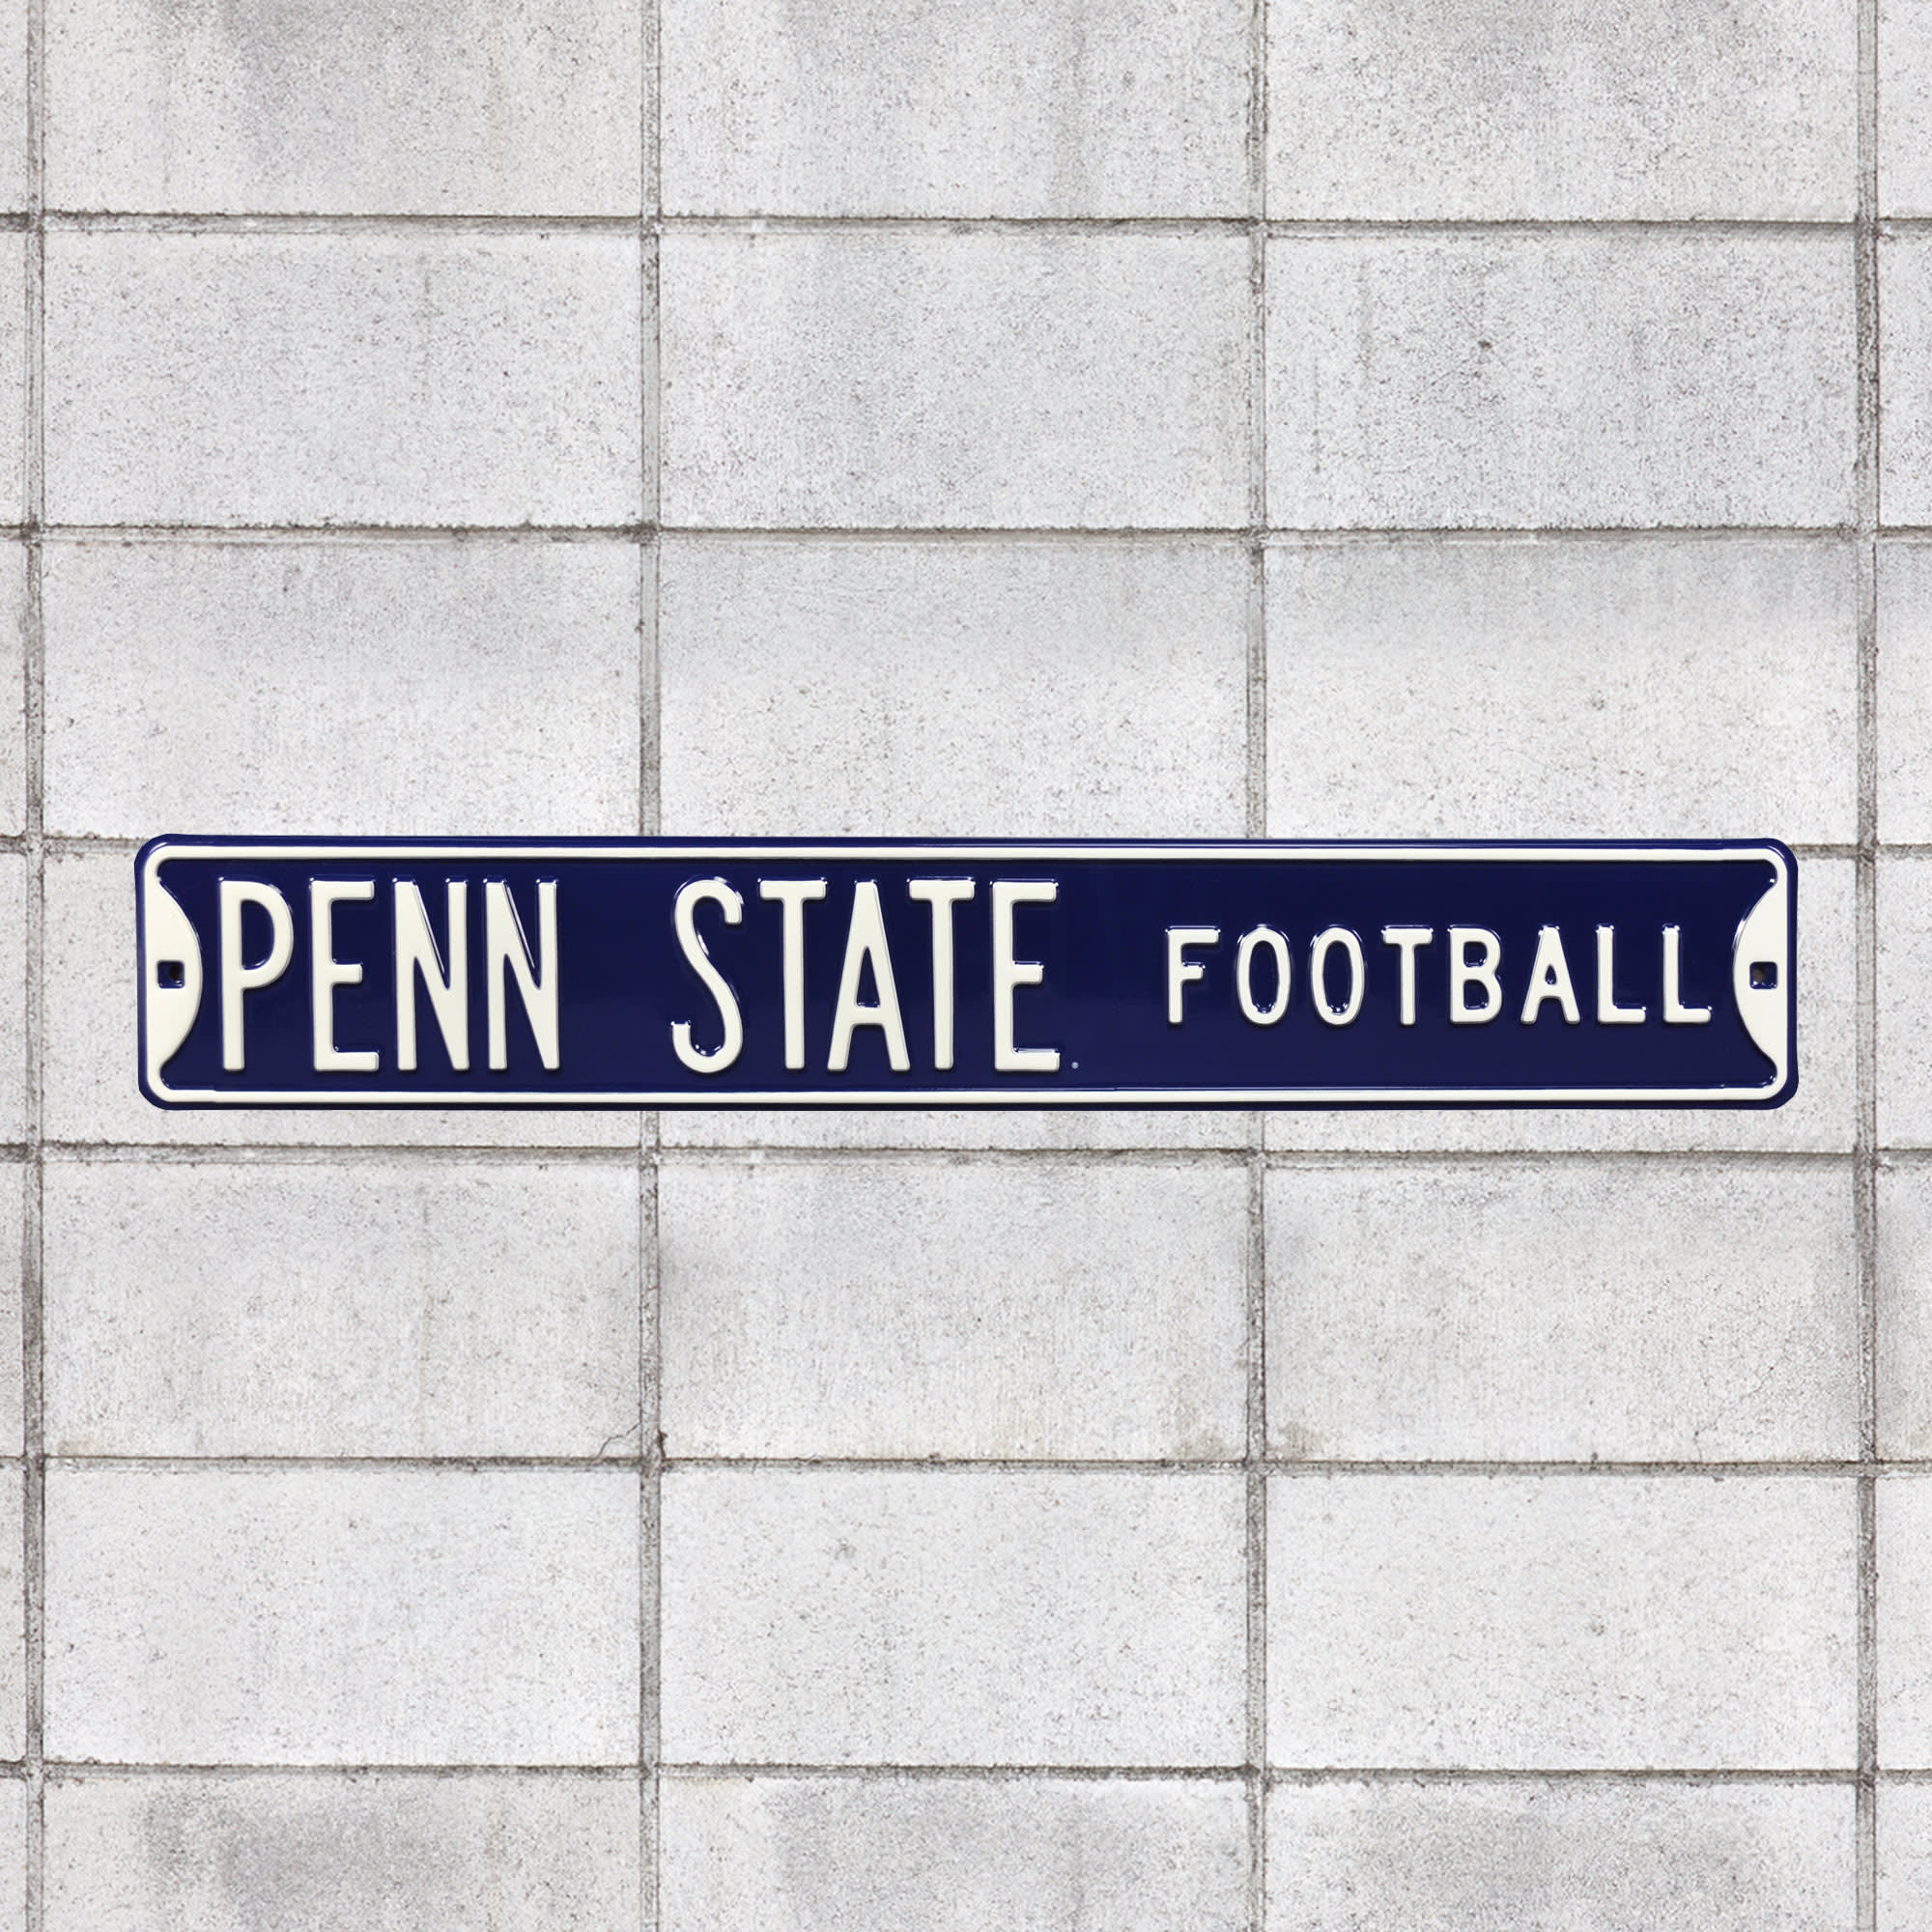 Penn State Nittany Lions: Penn State Football - Officially Licensed Metal Street Sign 36.0"W x 6.0"H by Fathead | 100% Steel